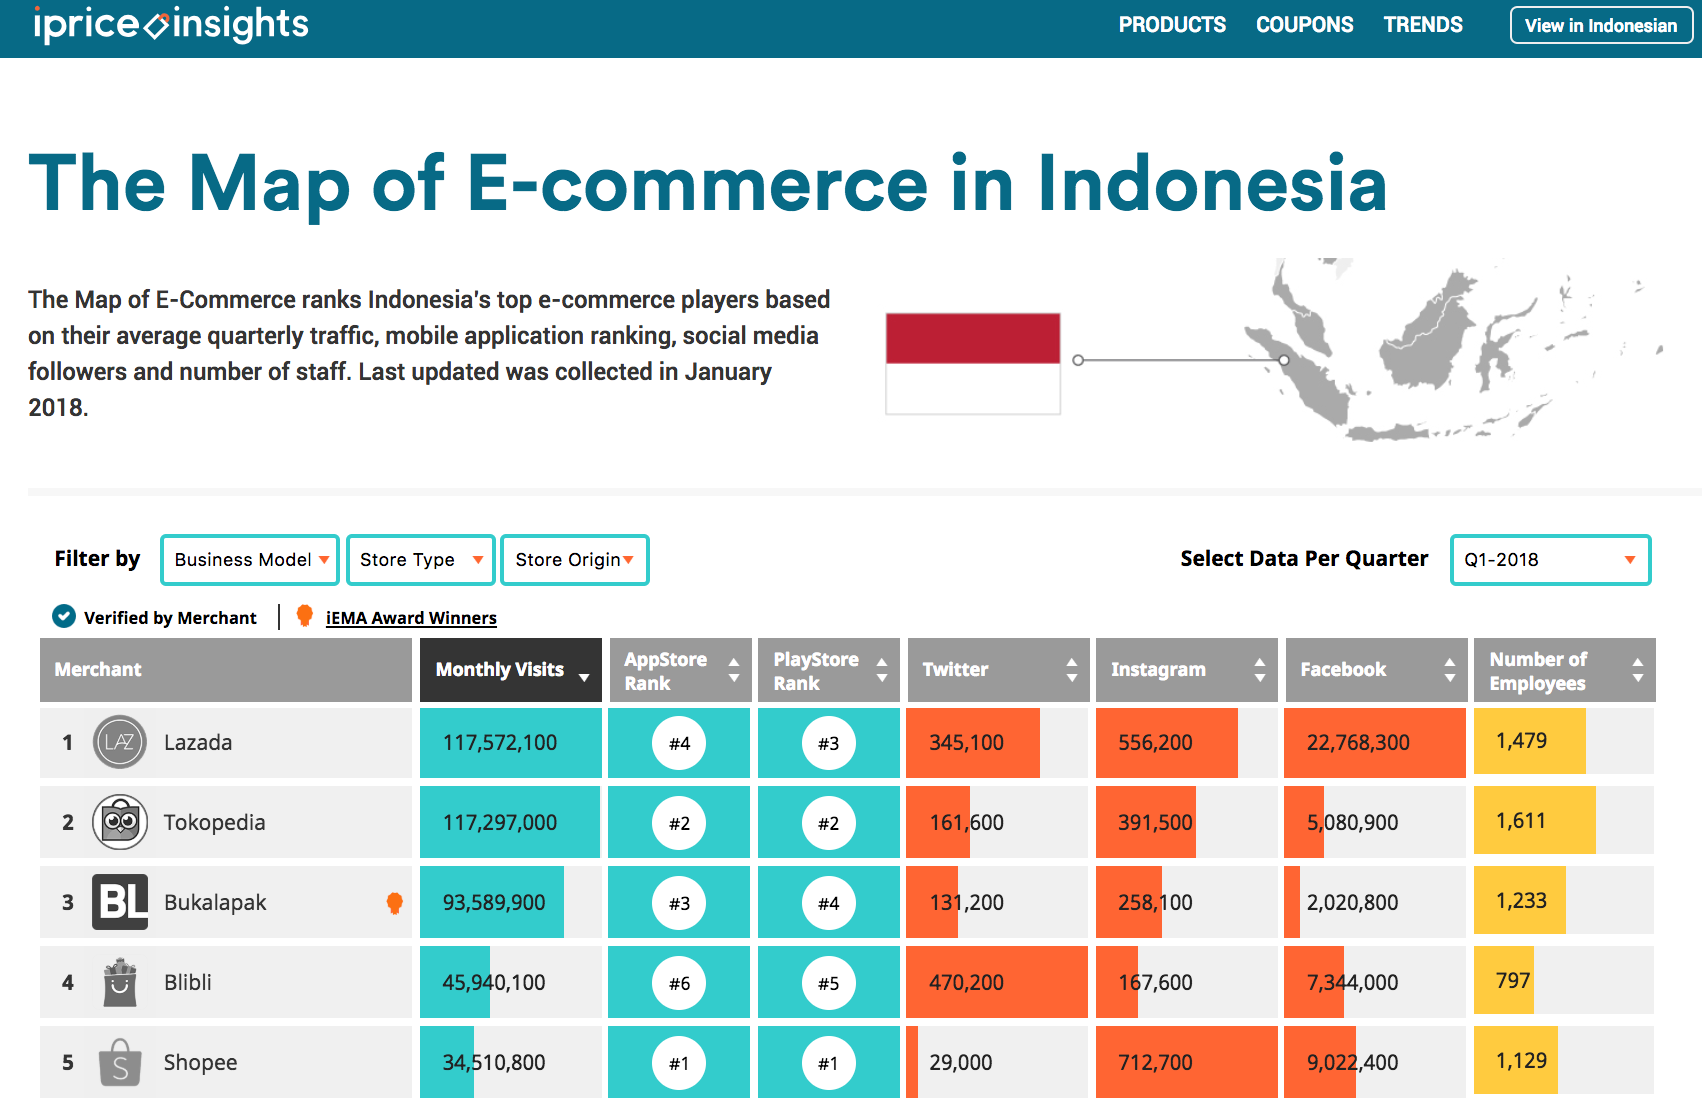 [INTERACTIVE CONTENT] The Map of E-Commerce in Indonesia | by Andrew